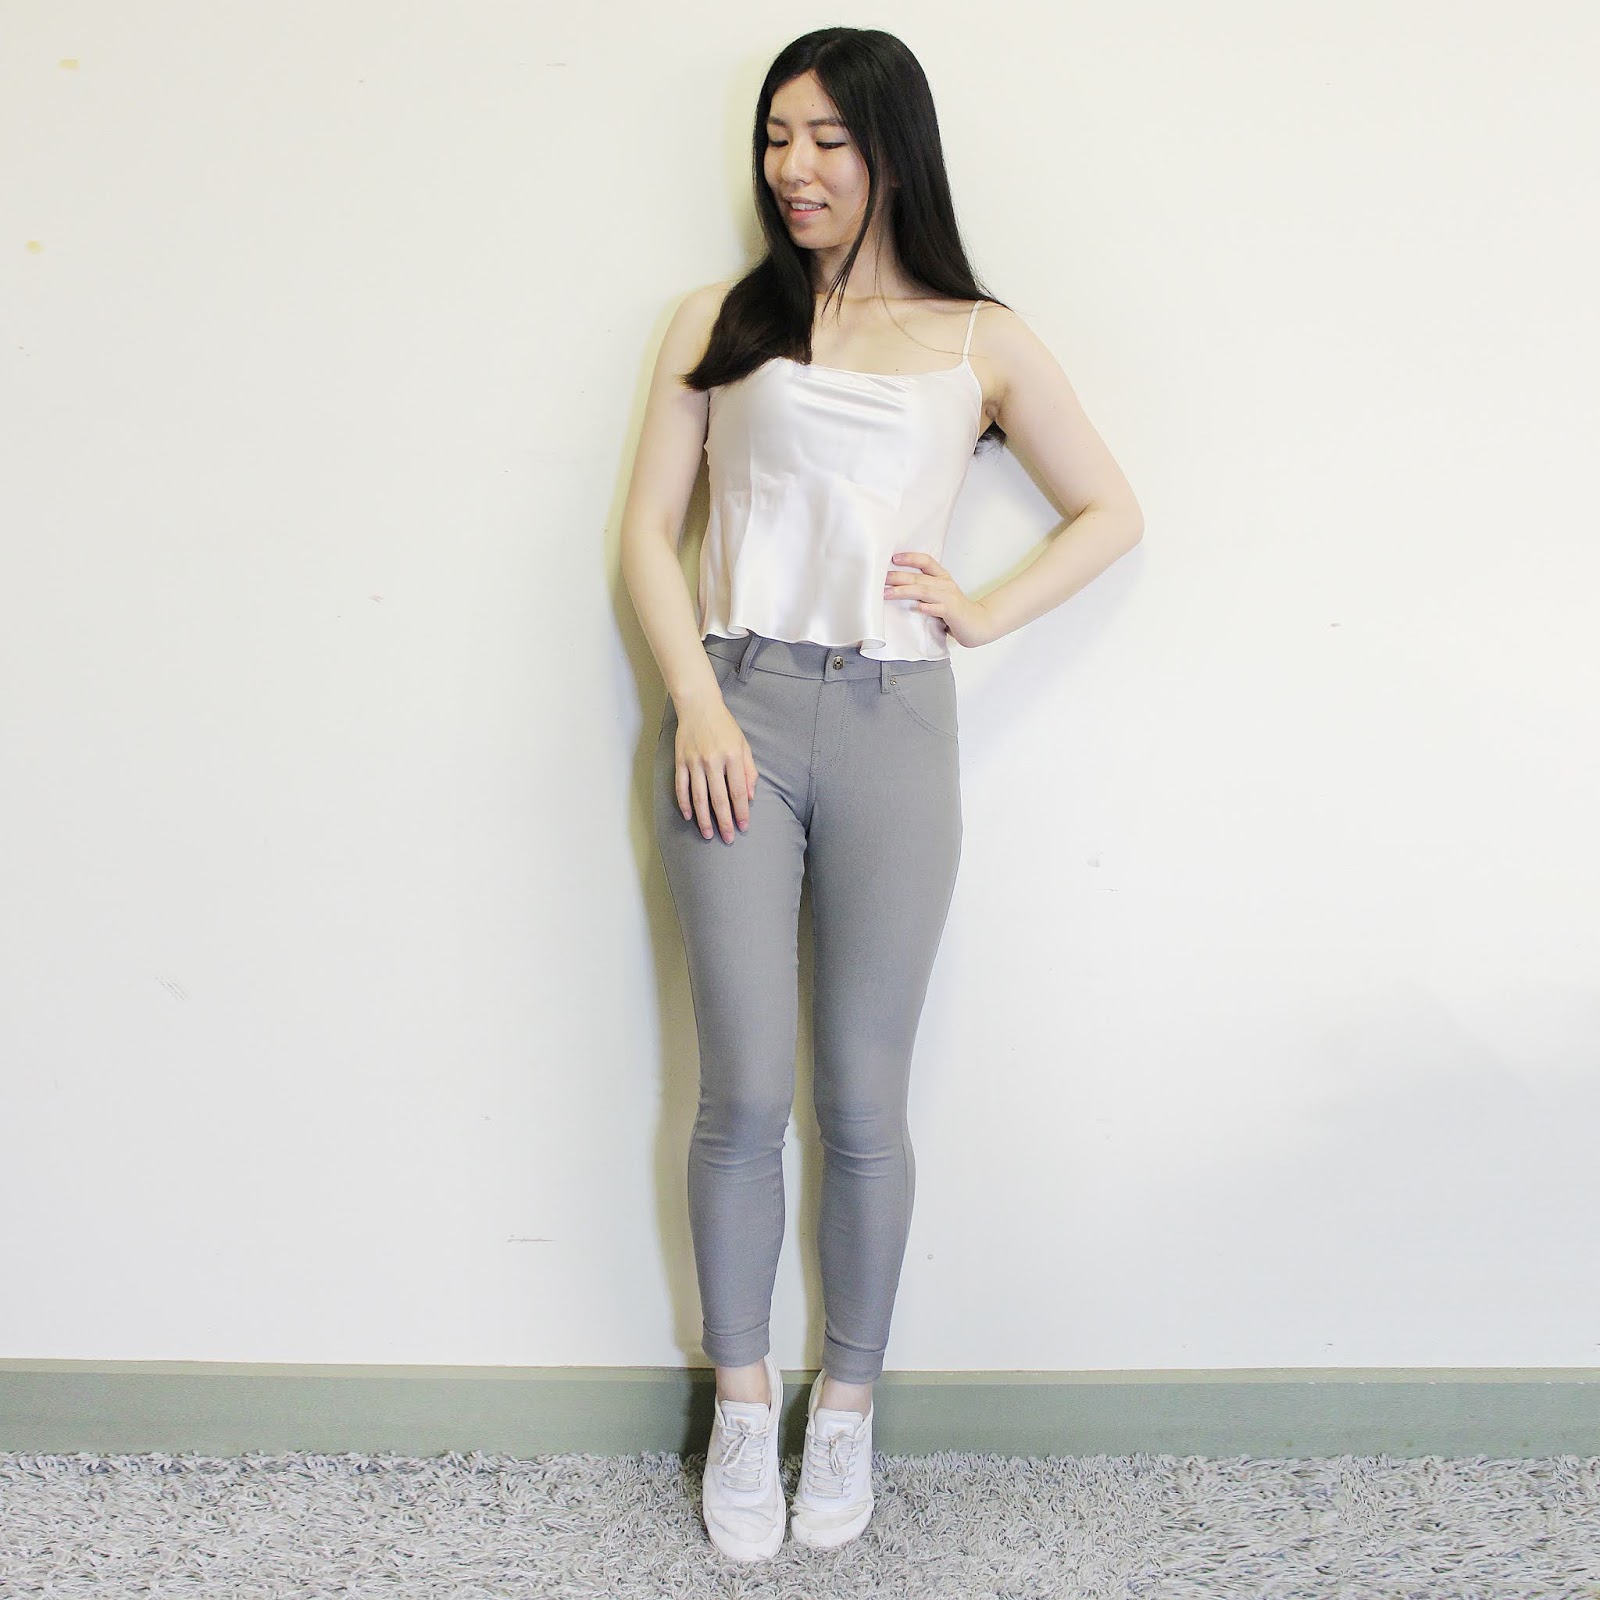 Trying Out Grey Leggings- UK Tights Review - fantail flo